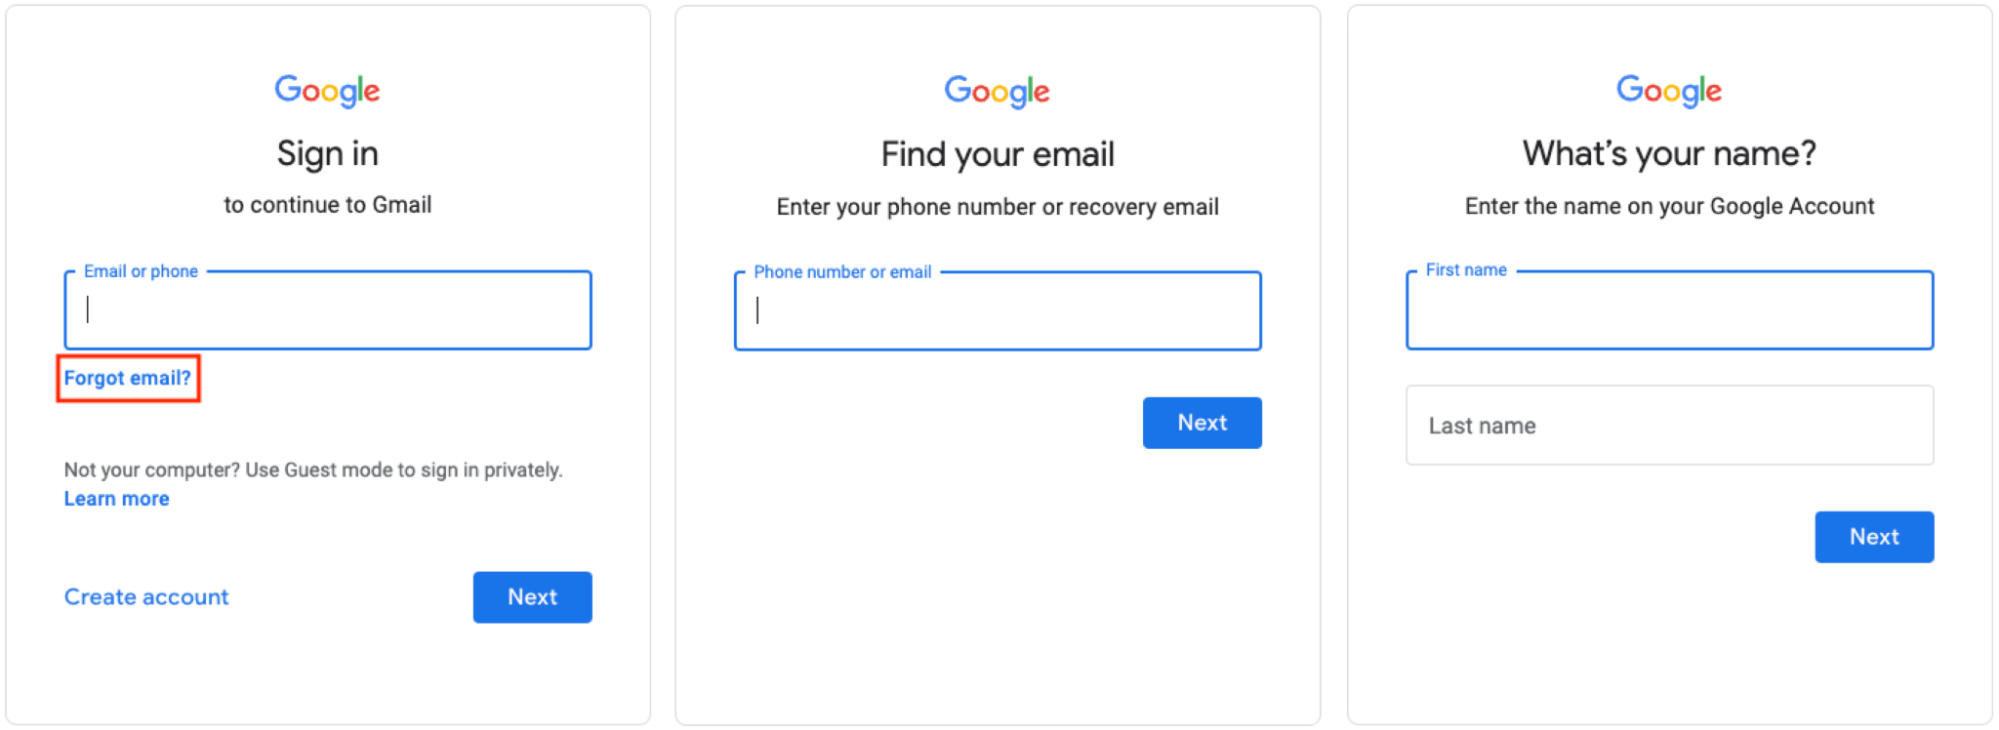 How to access Google Workspace webmail using Gmail